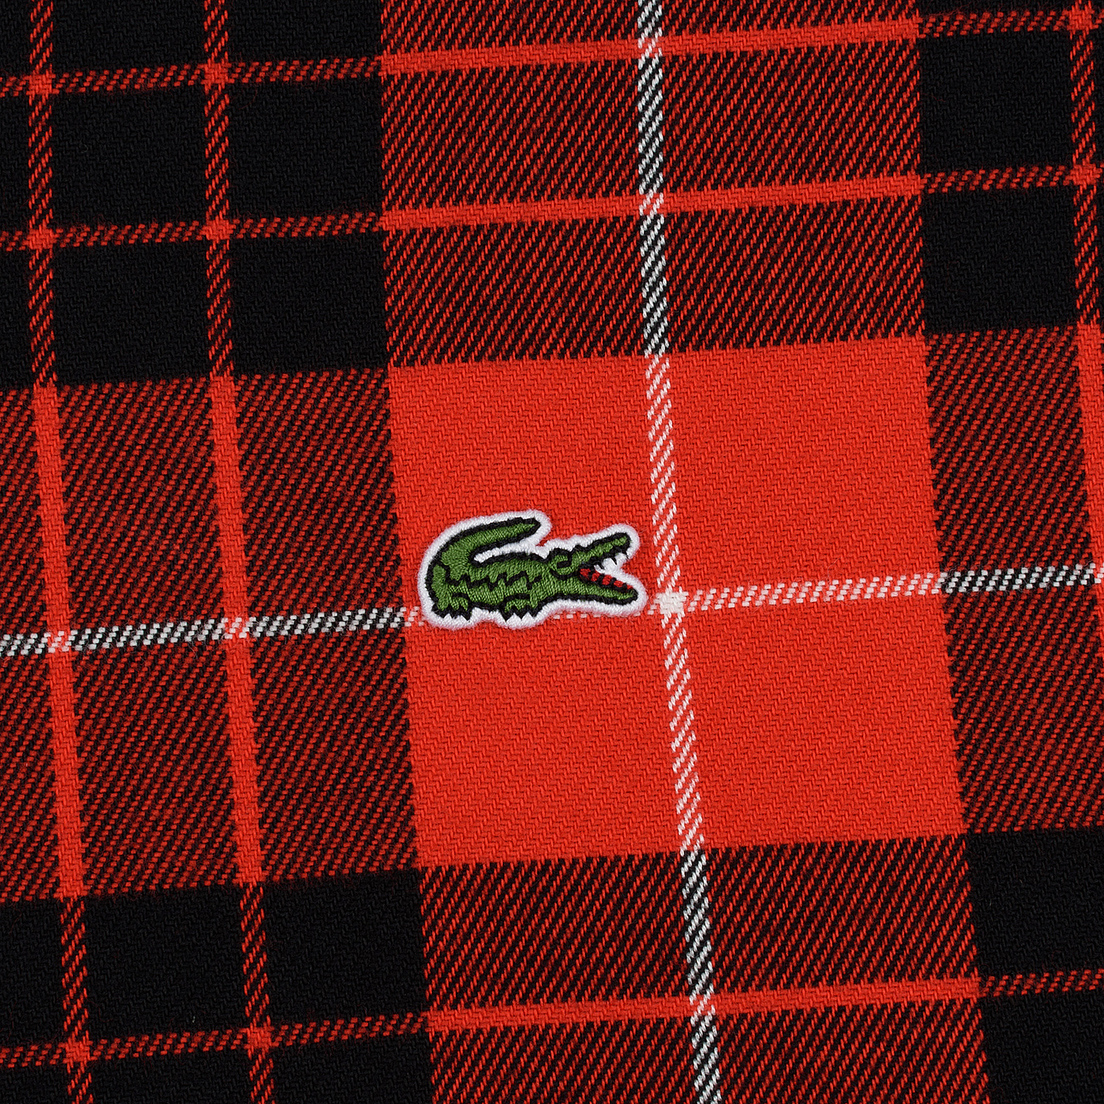 Lacoste Live Мужская рубашка Boxy Fit Check Flannel